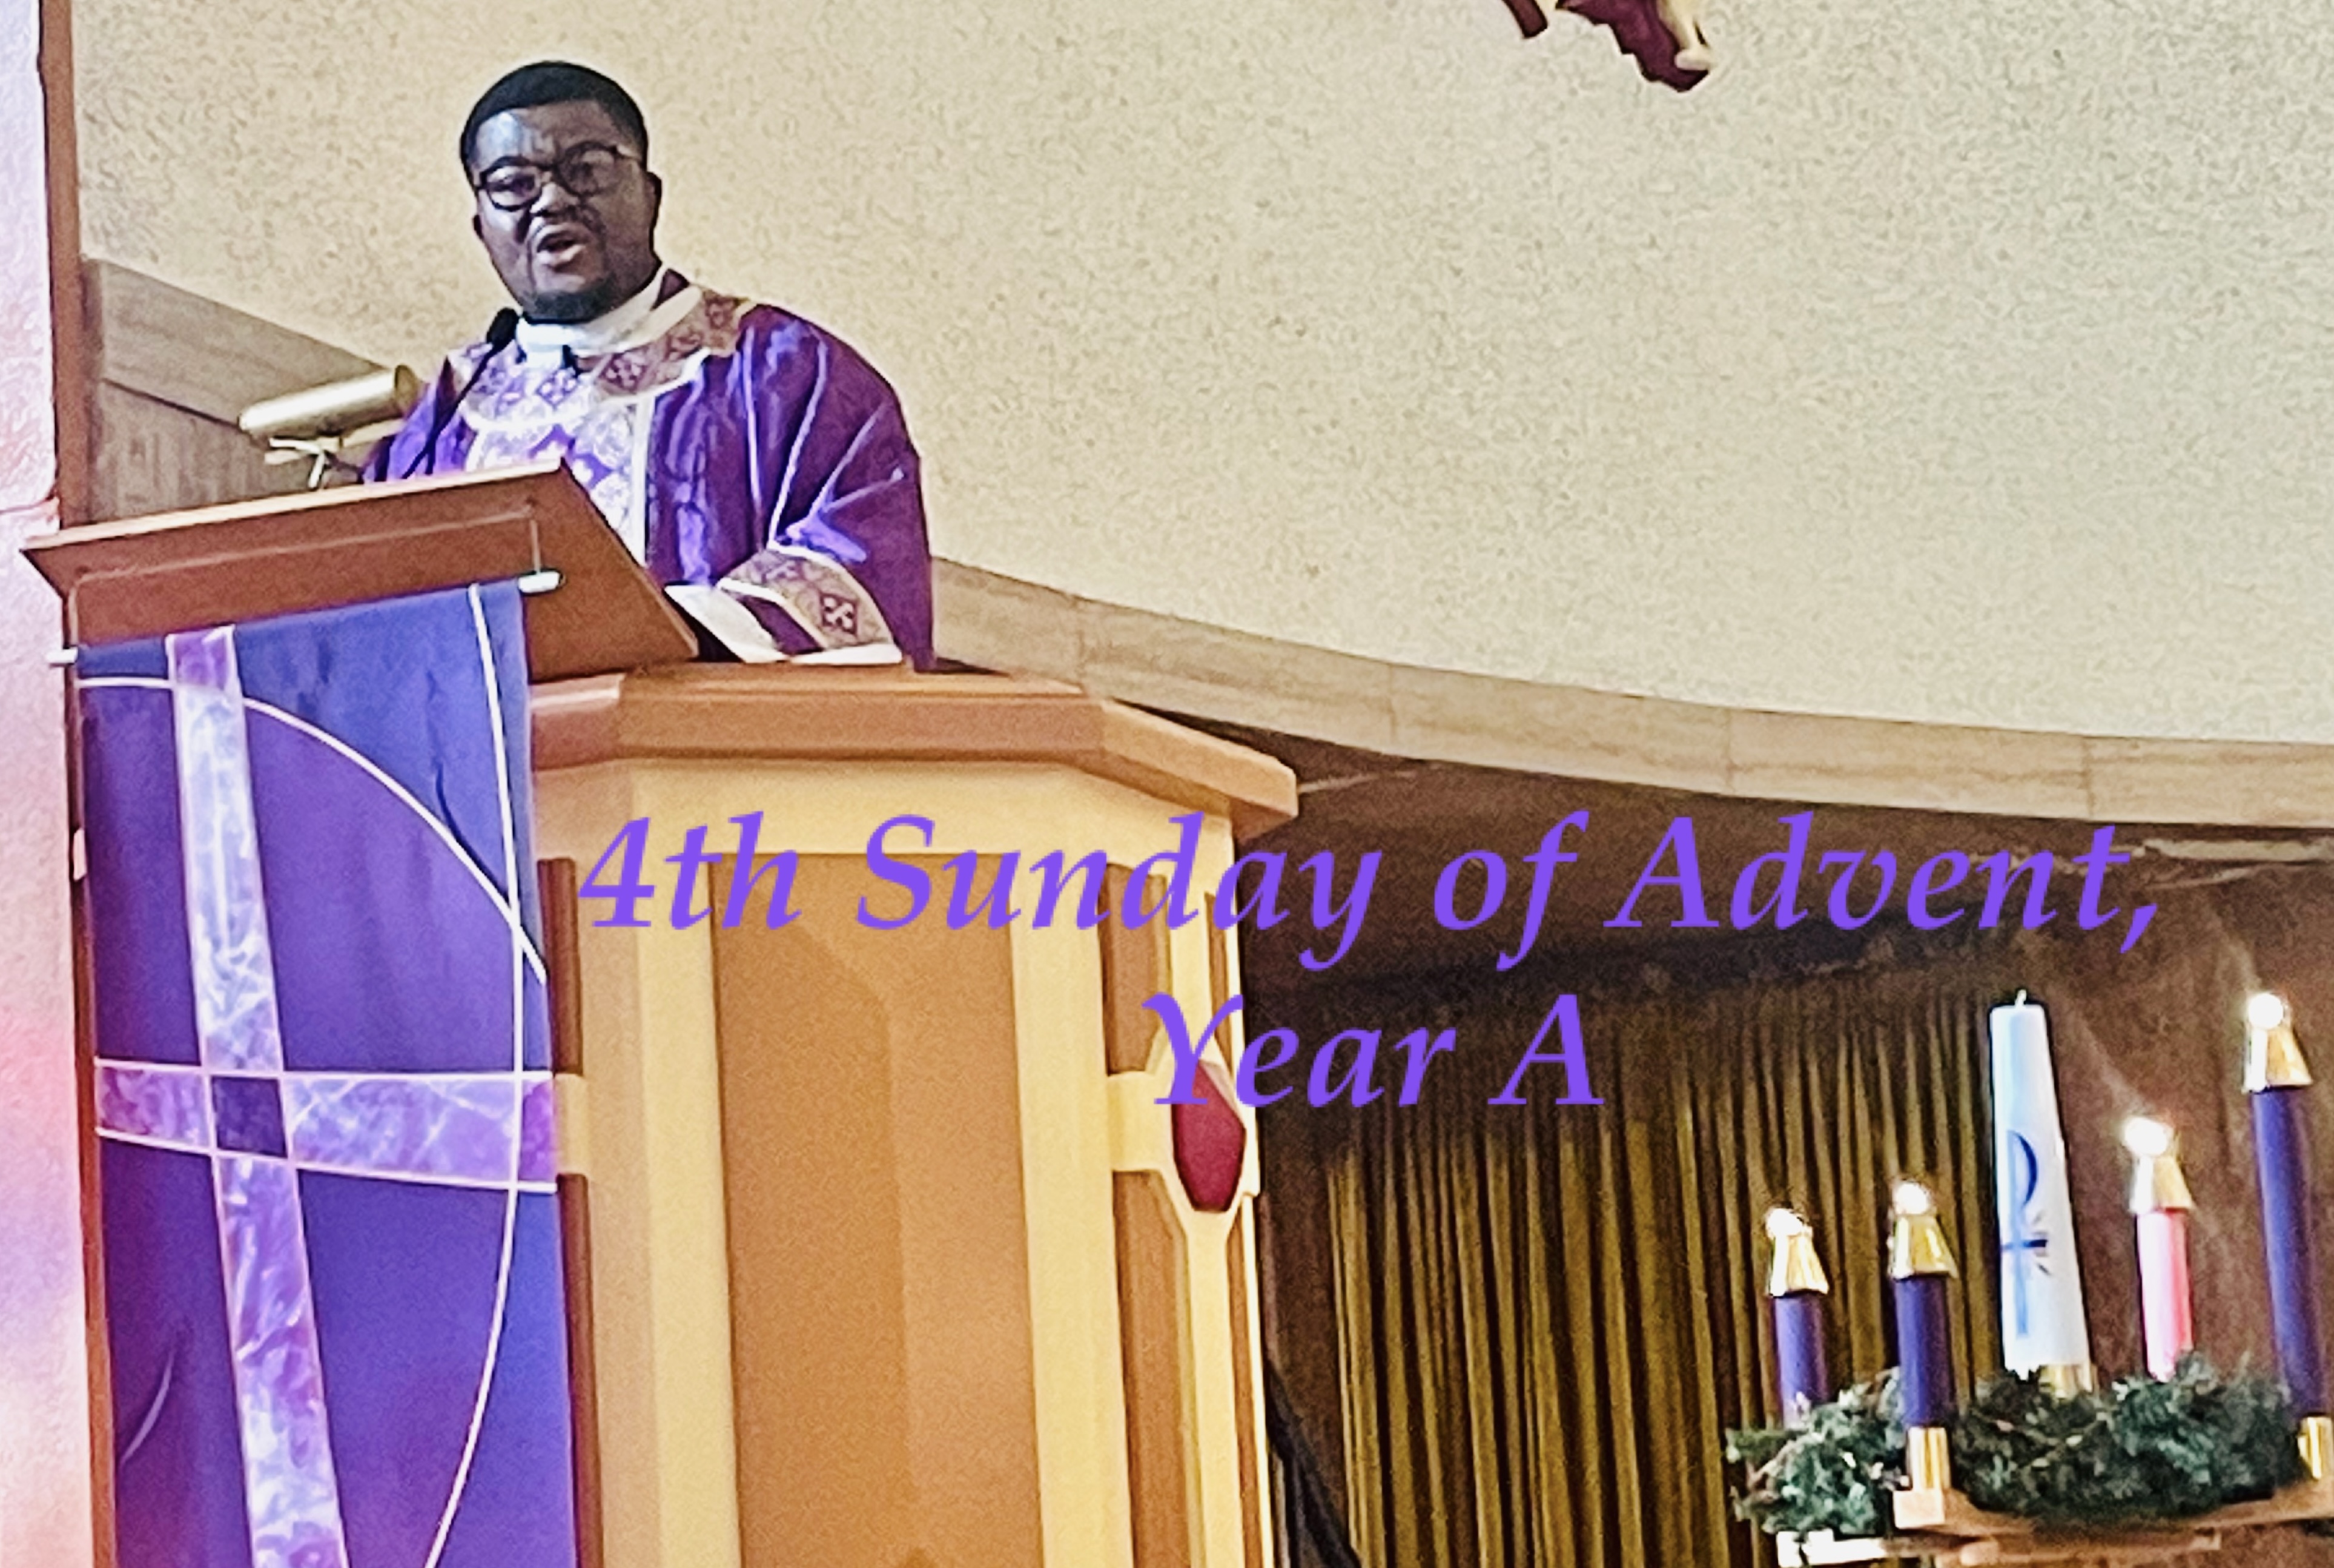 4th Sunday of Advent, Year A